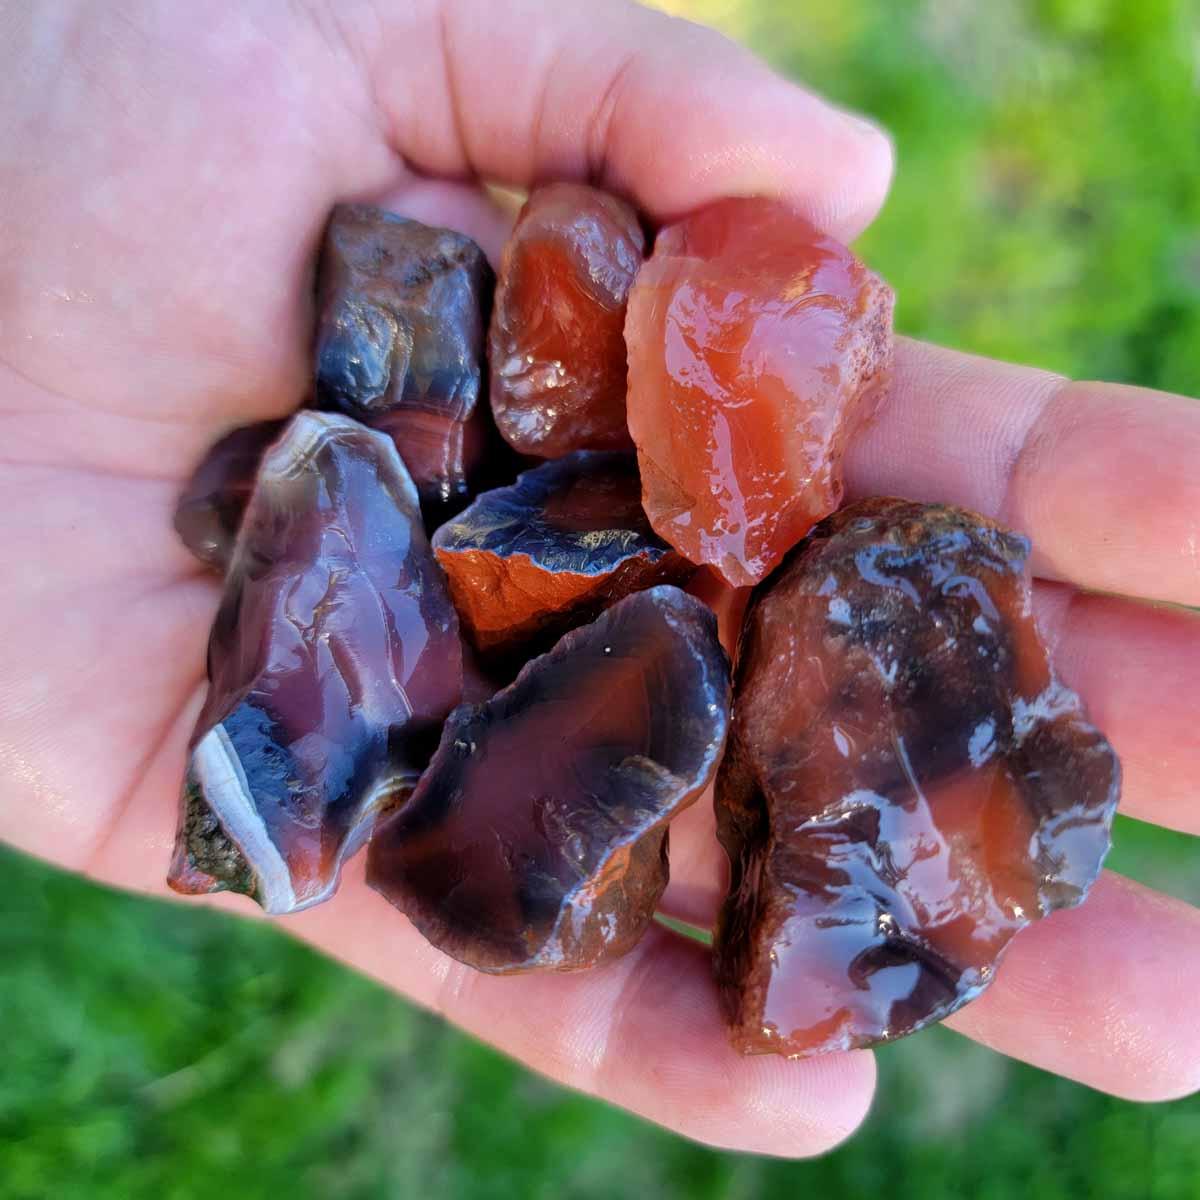 Random Pull Swazi Agate Rough Chunks! Great for Tumbling! Swali Agate - Lapidary Central